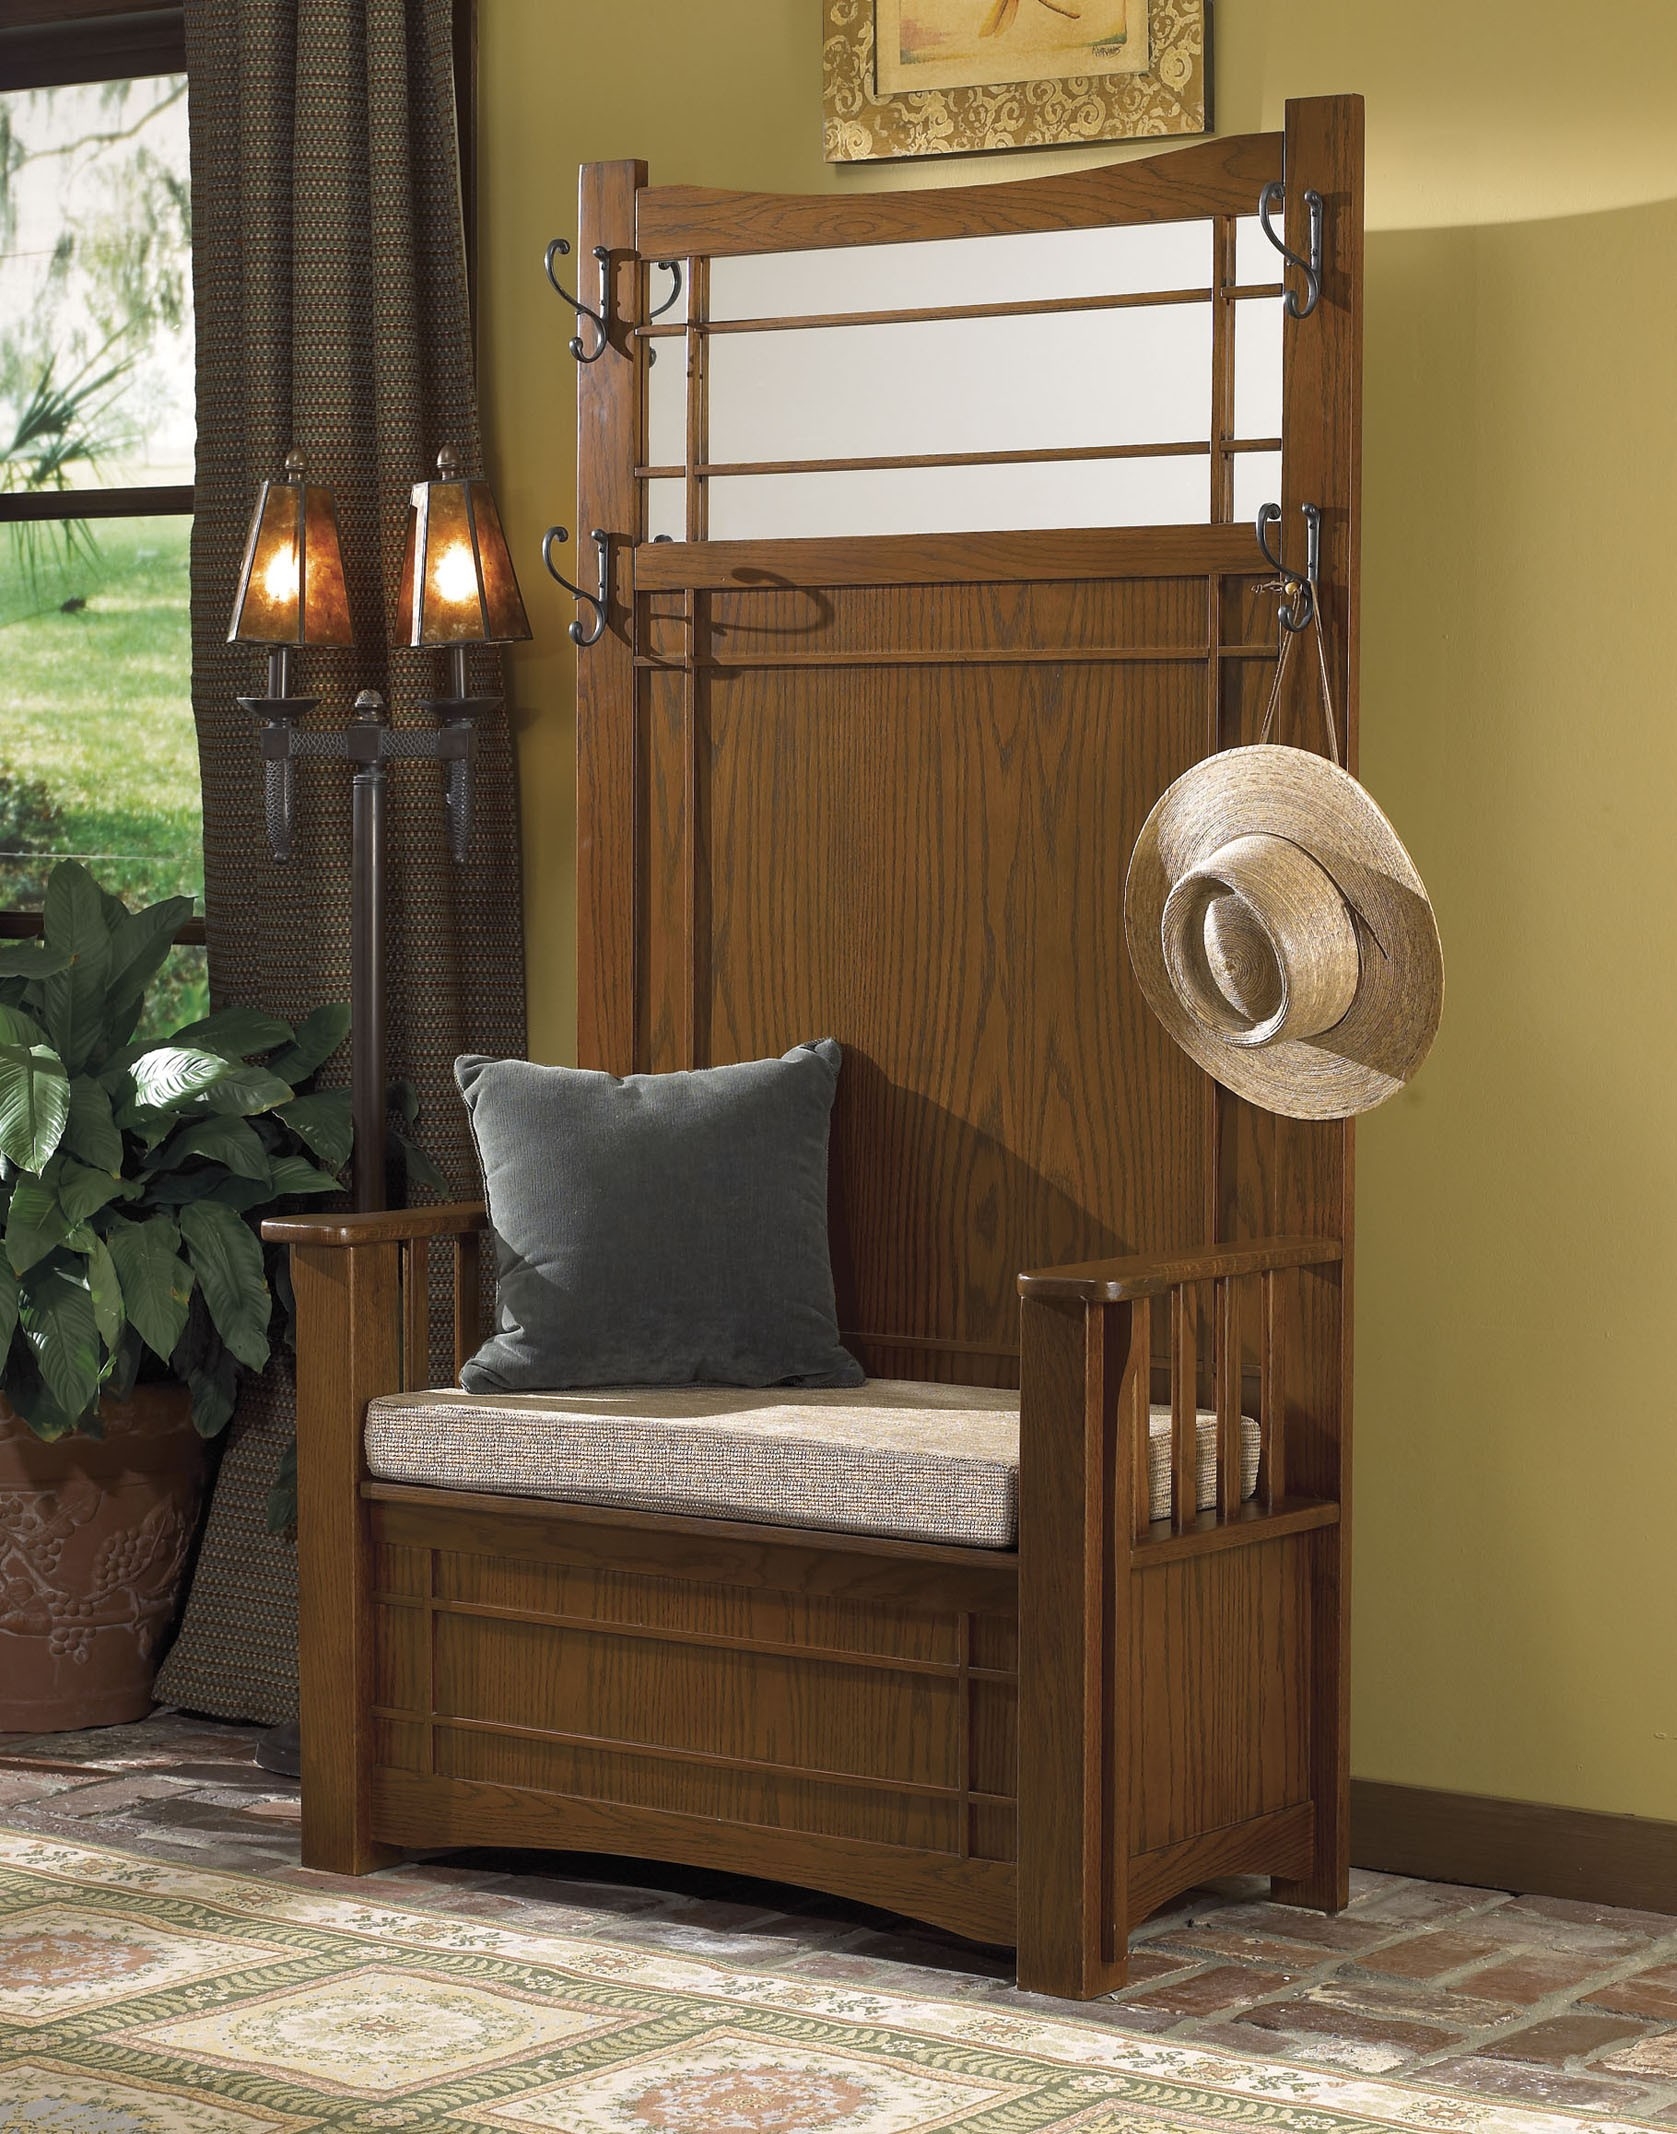 Powell Furniture Mission Oak Hall Tree With Storage Bench